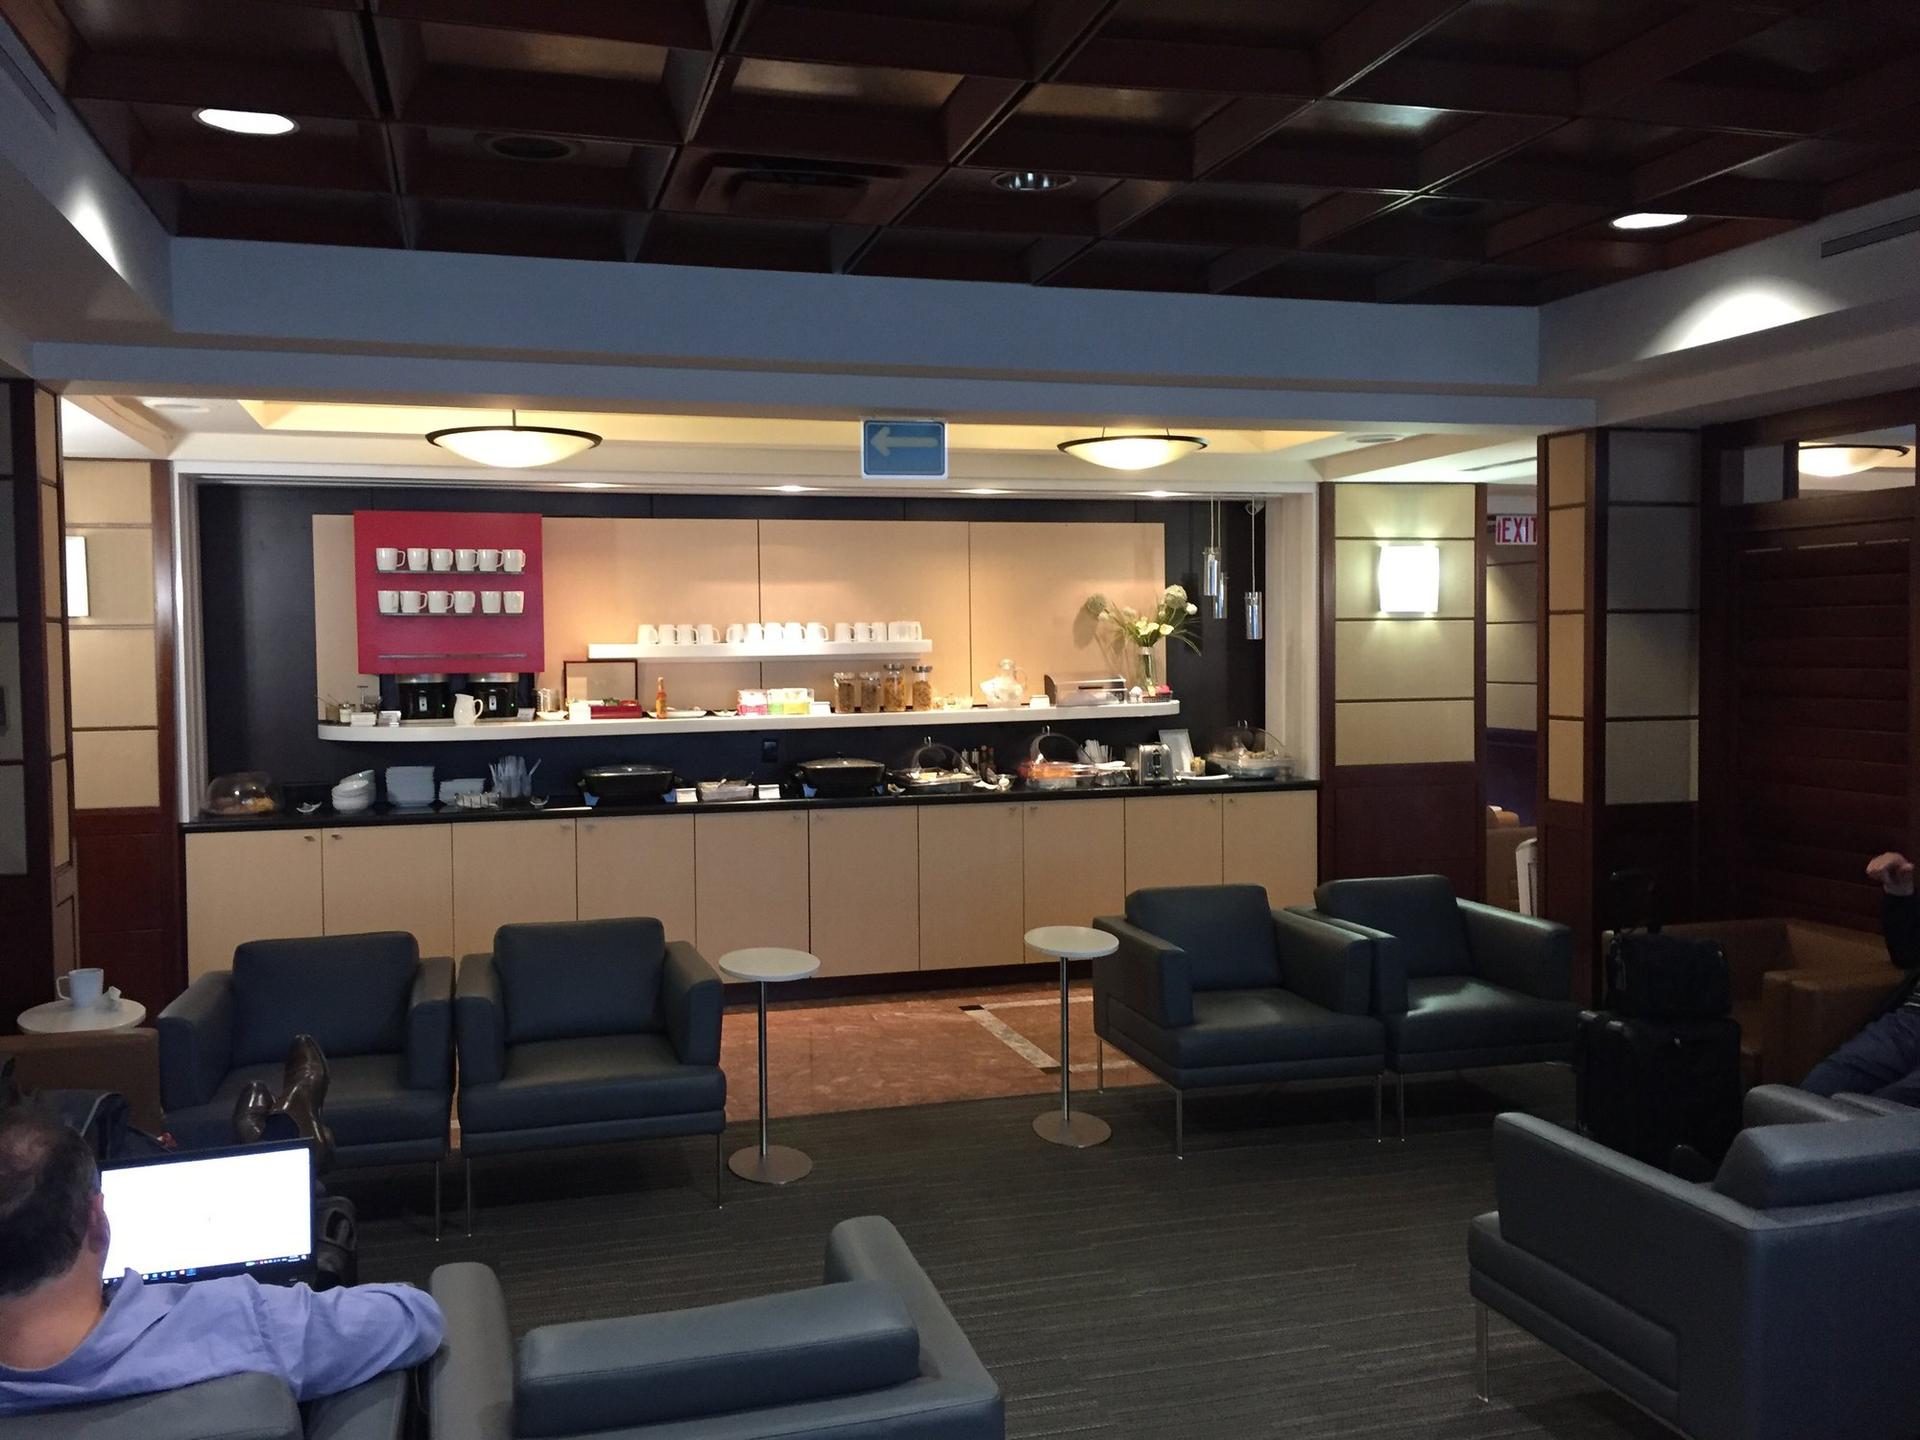 American Airlines Admirals Club image 32 of 32